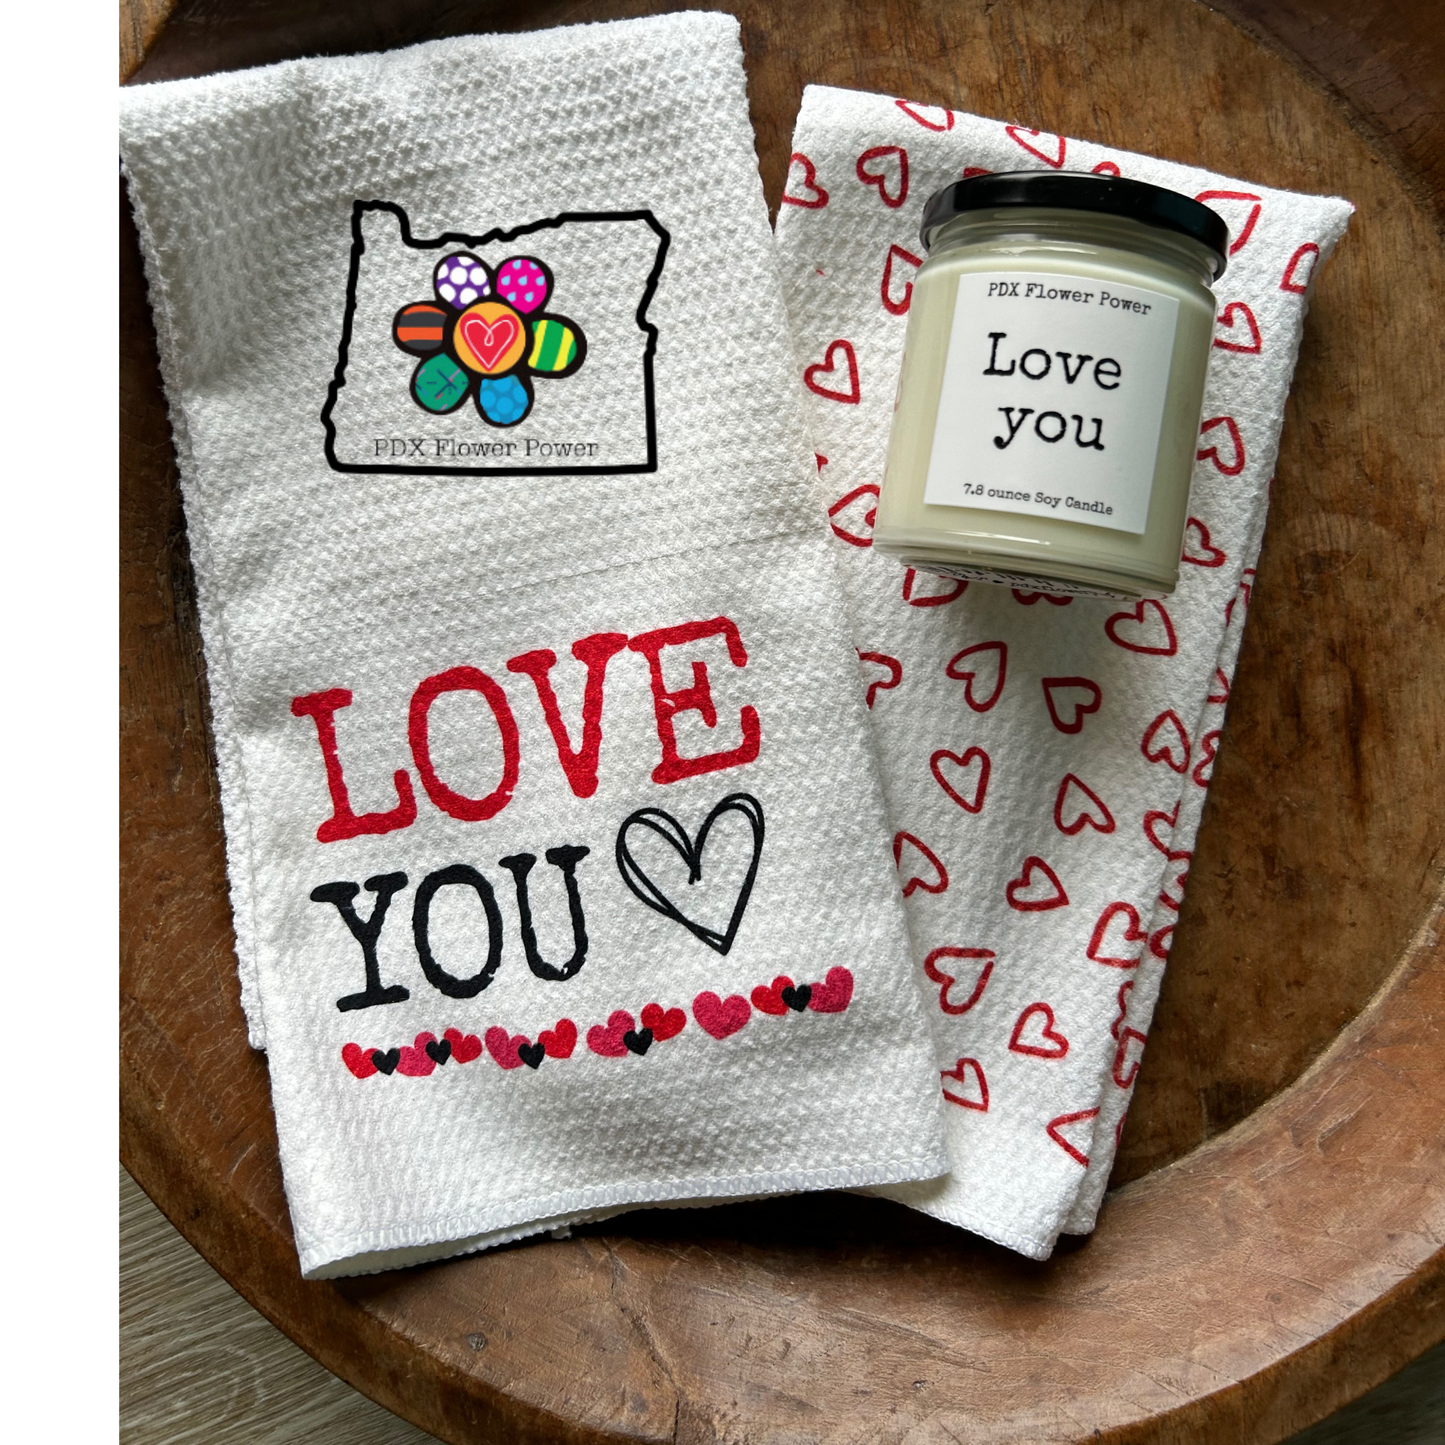 Love You candle and towel set,  Happy Valentine's Day gift, heart dish towels, Valentine candles.